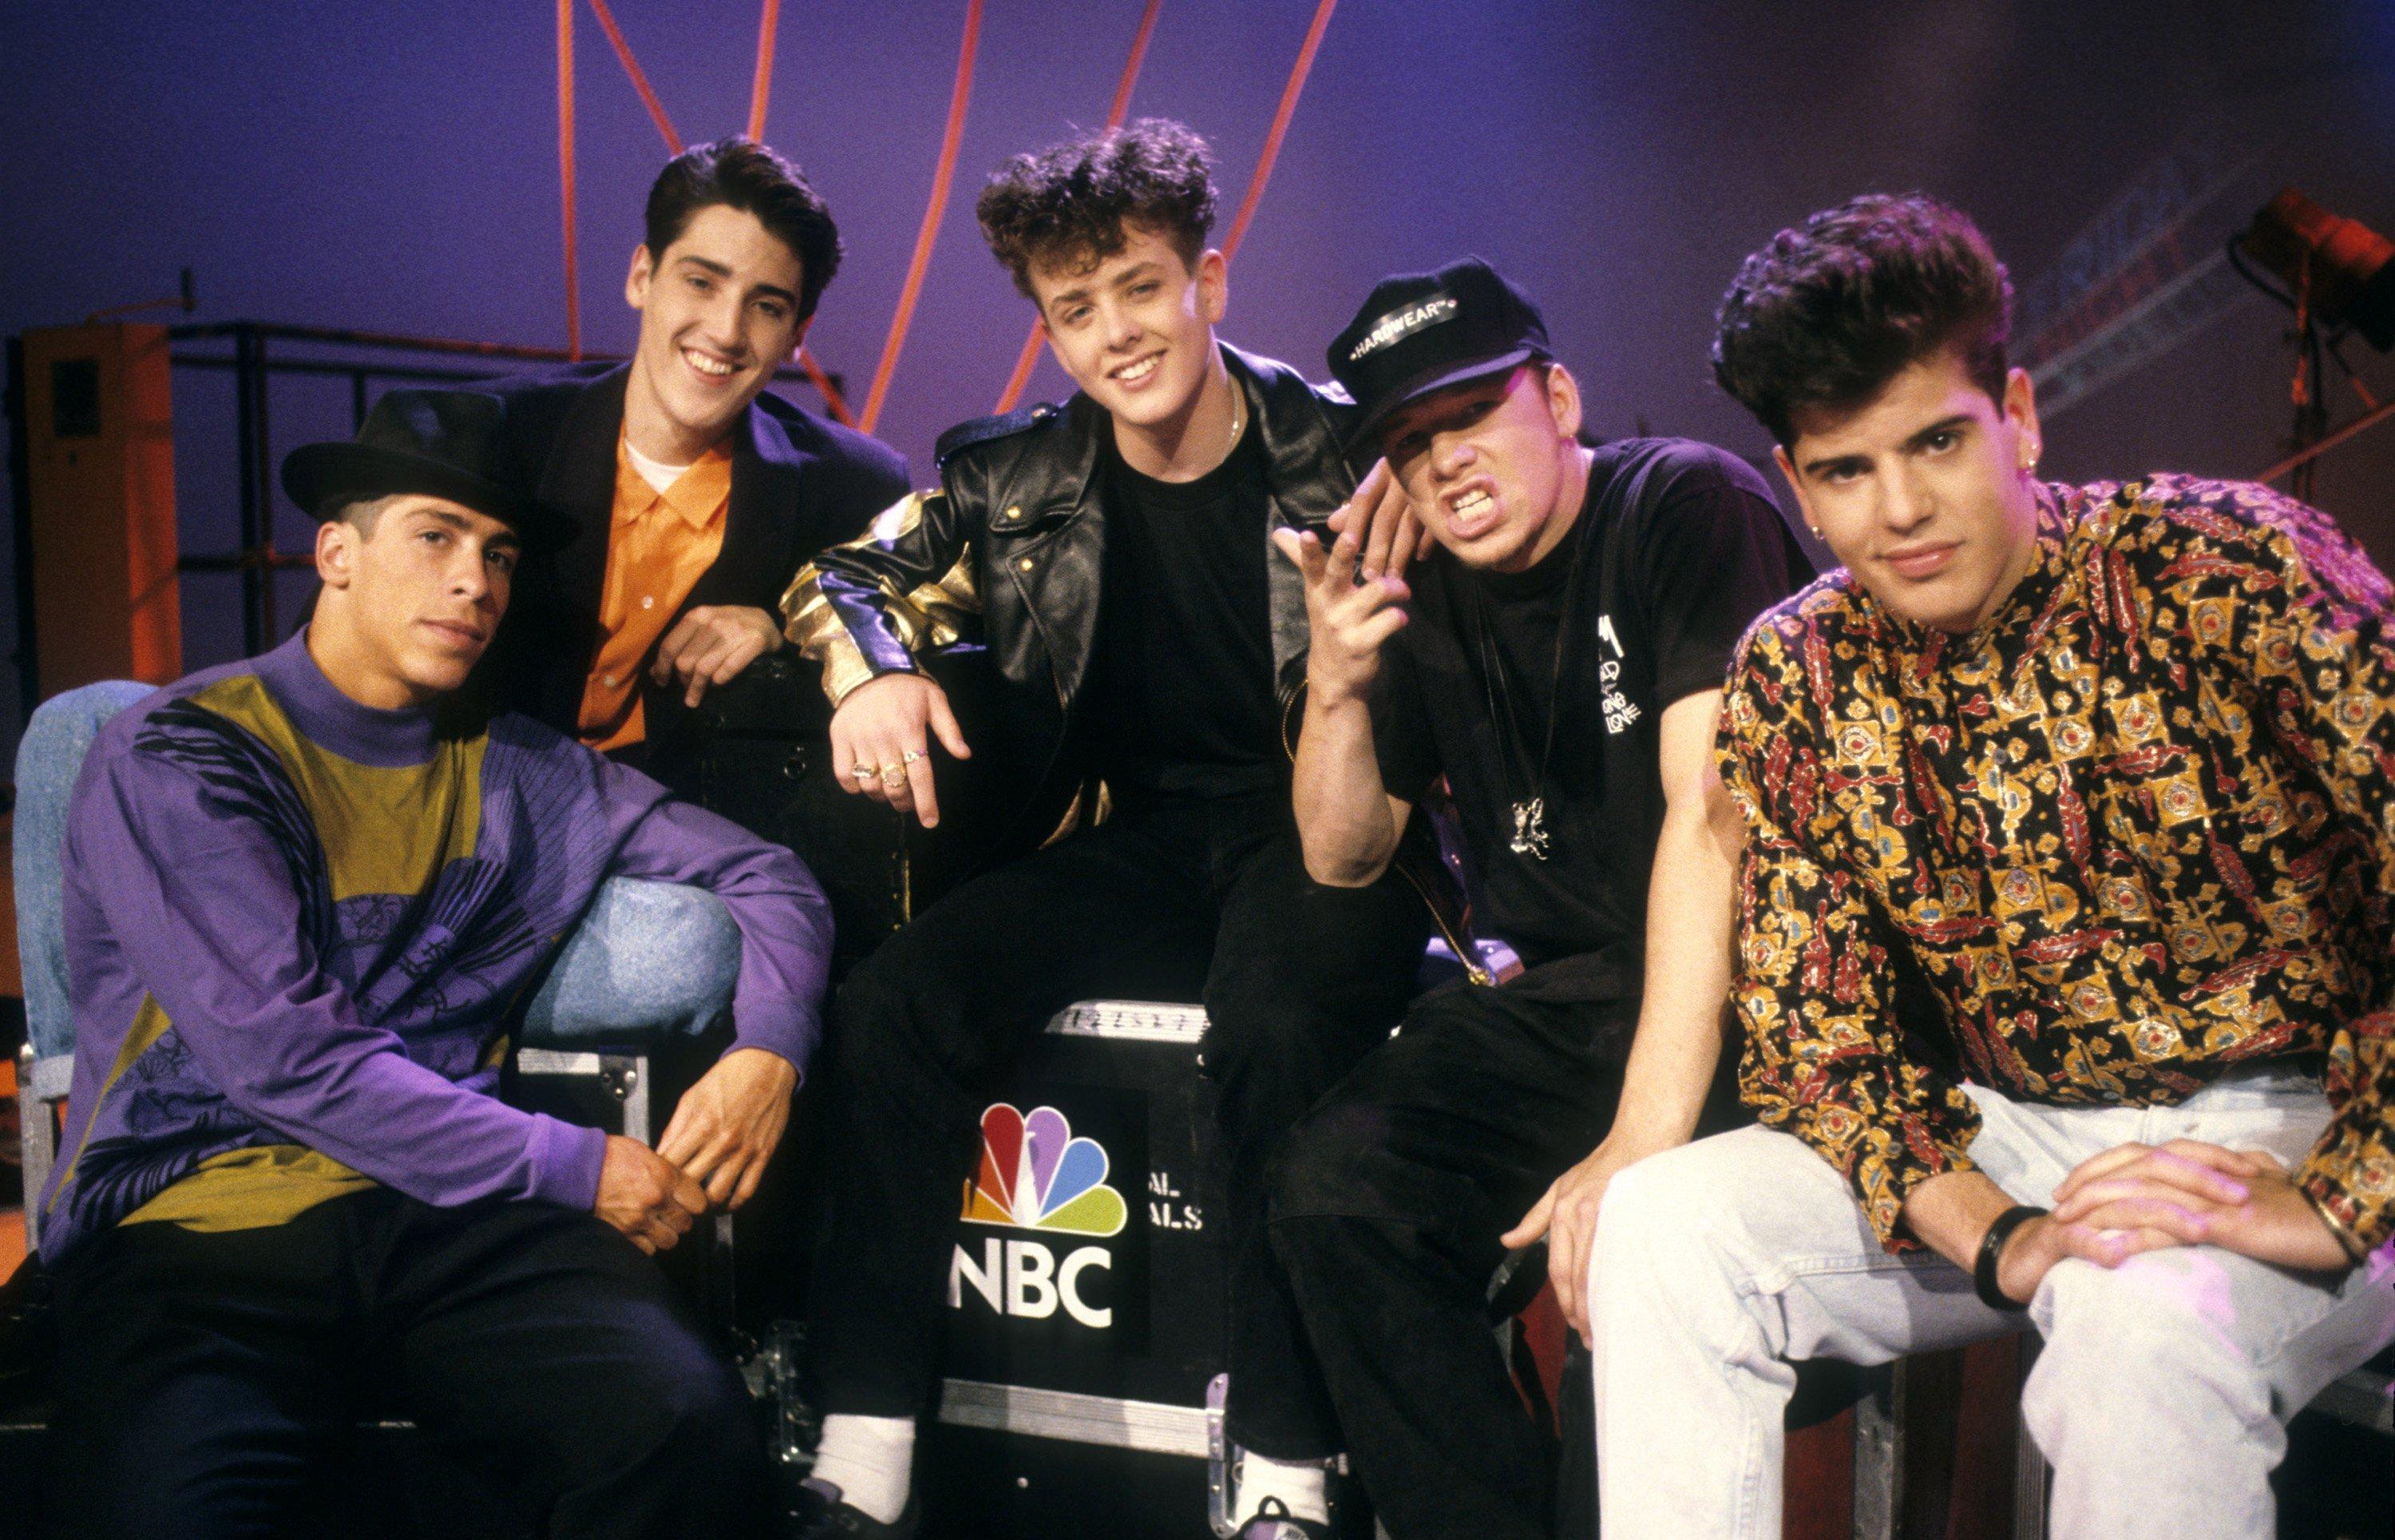 New Kids On The Block in 1989